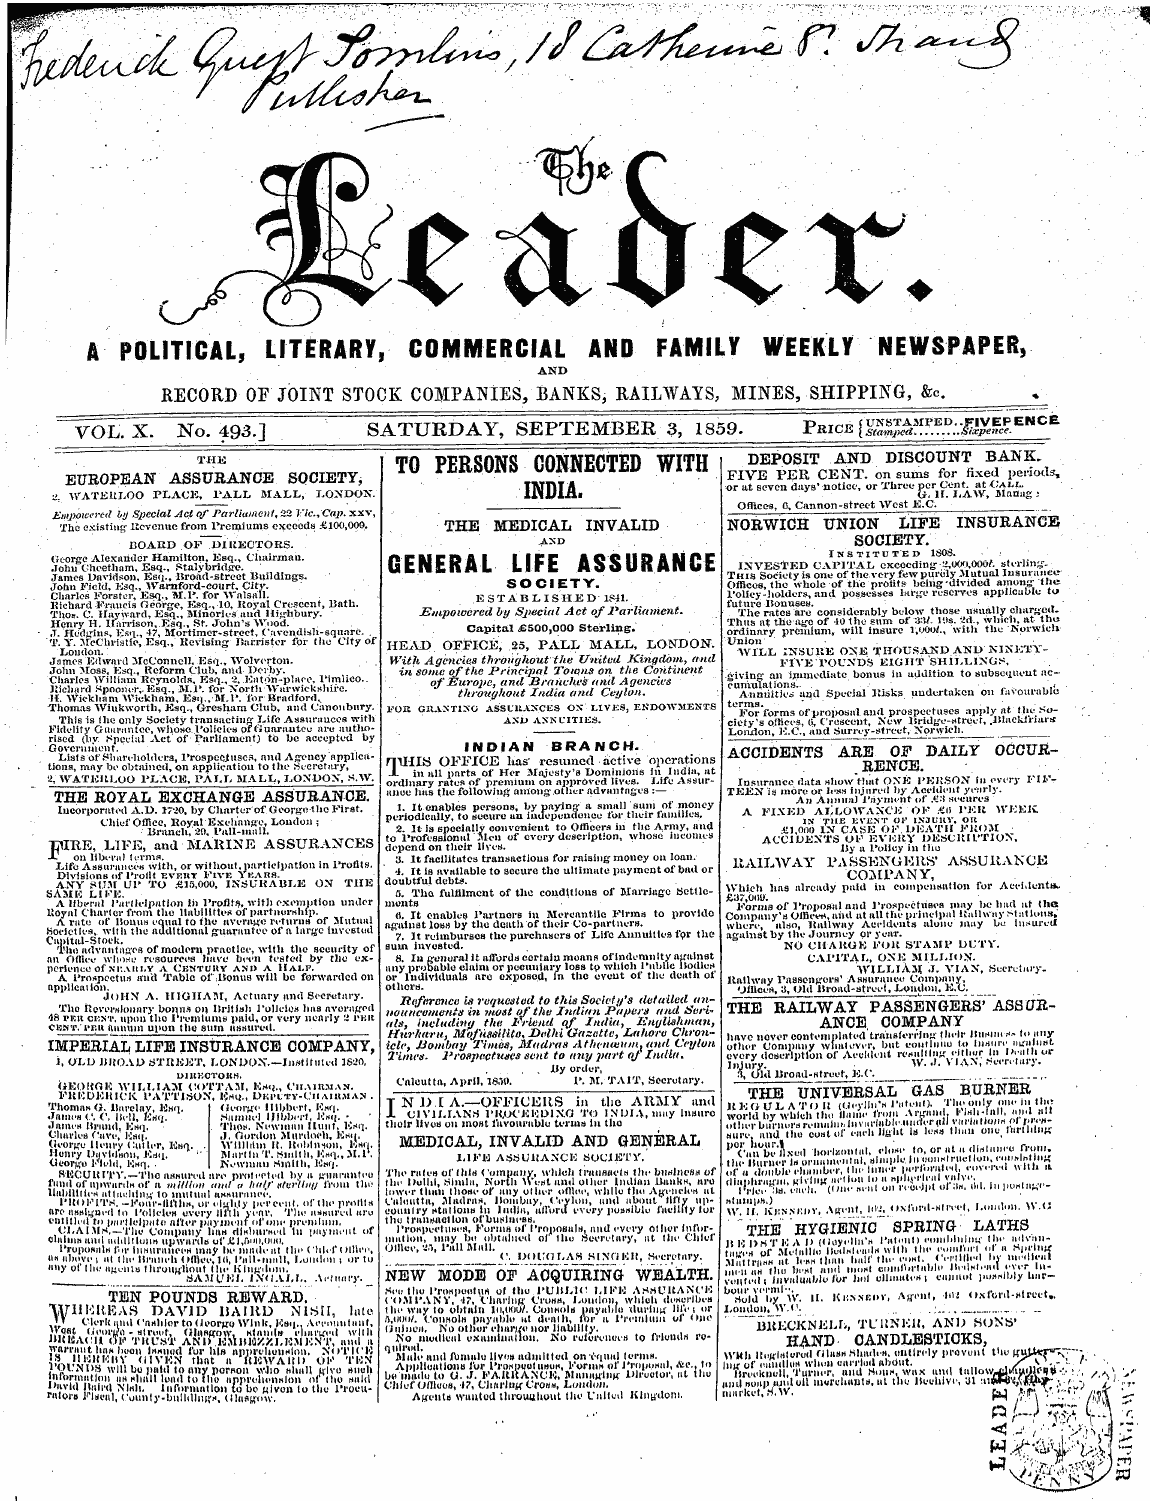 Leader (1850-1860): jS F Y, 2nd edition - Ad00114